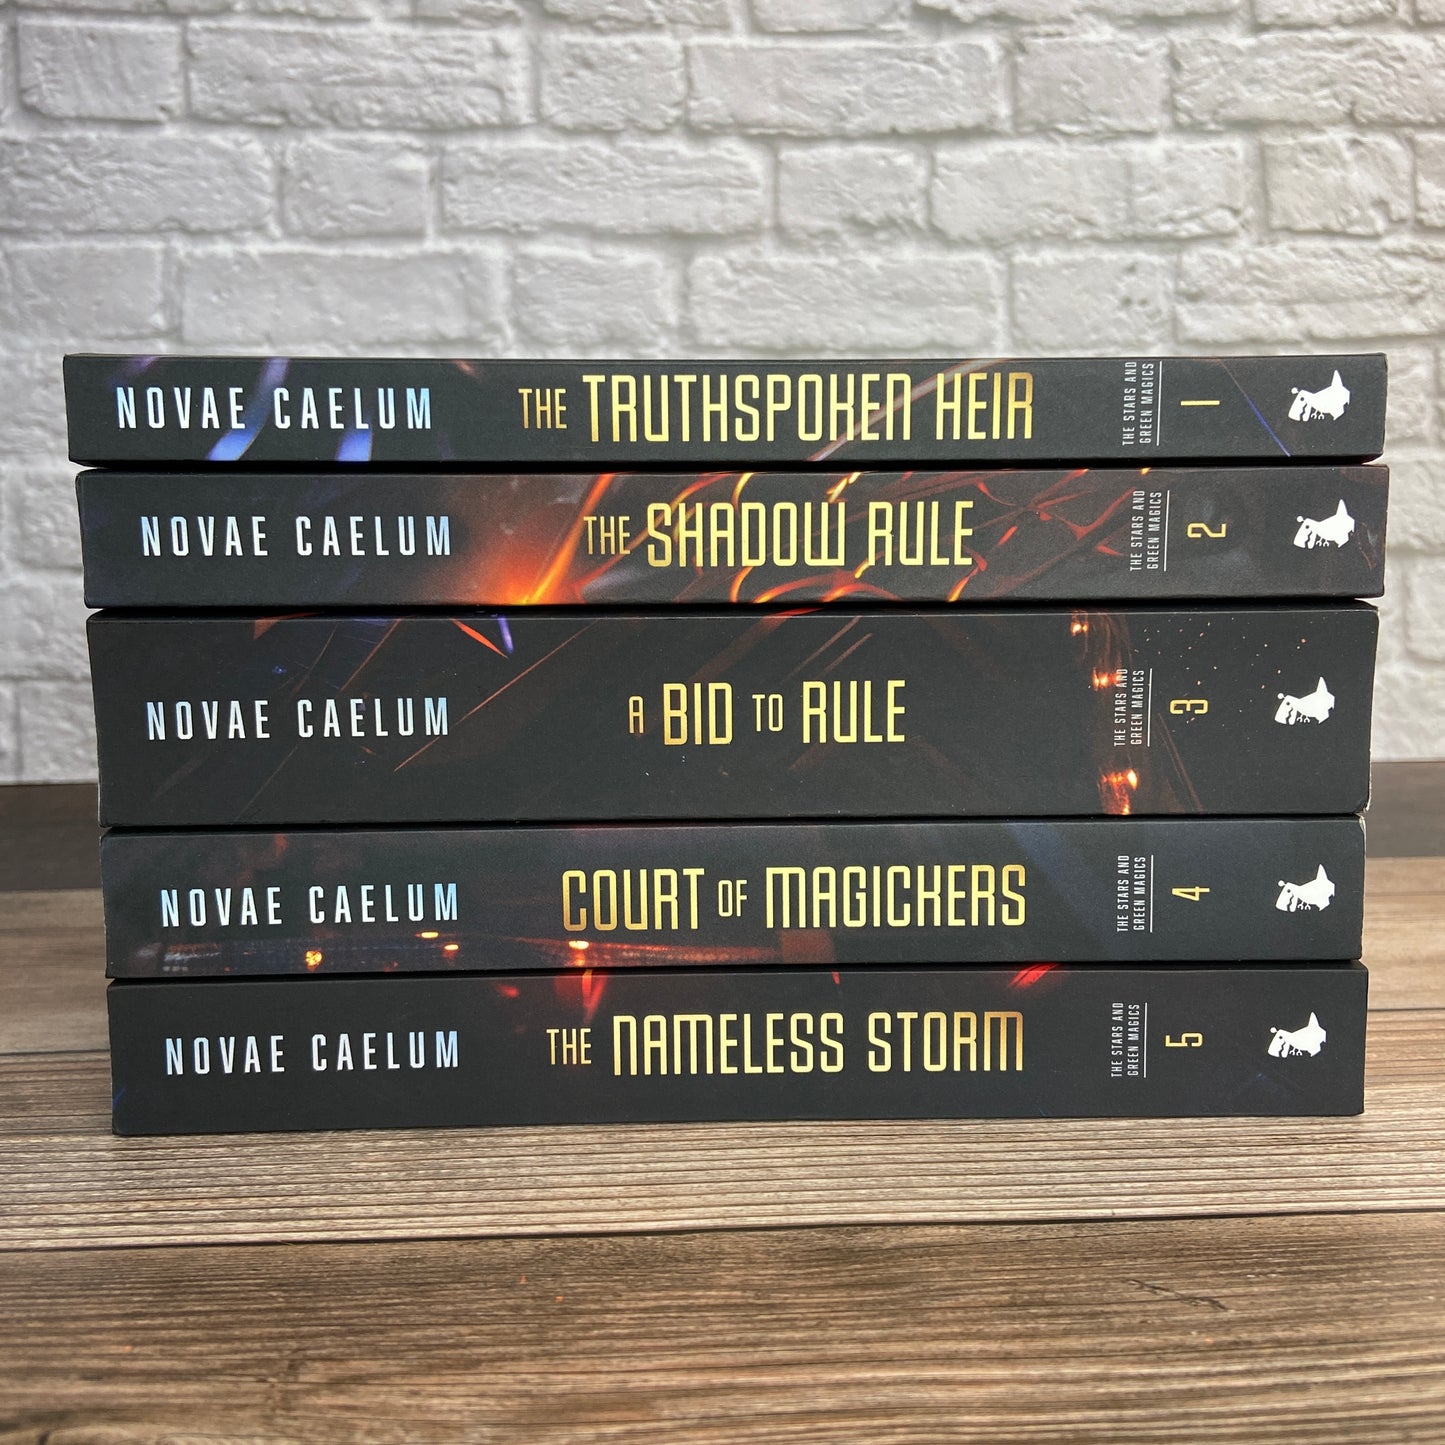 A stack of five "Novae Caelum" fantasy novels, with titles visible on their spines, exploring themes of sapphic arranged marriage and space magic.